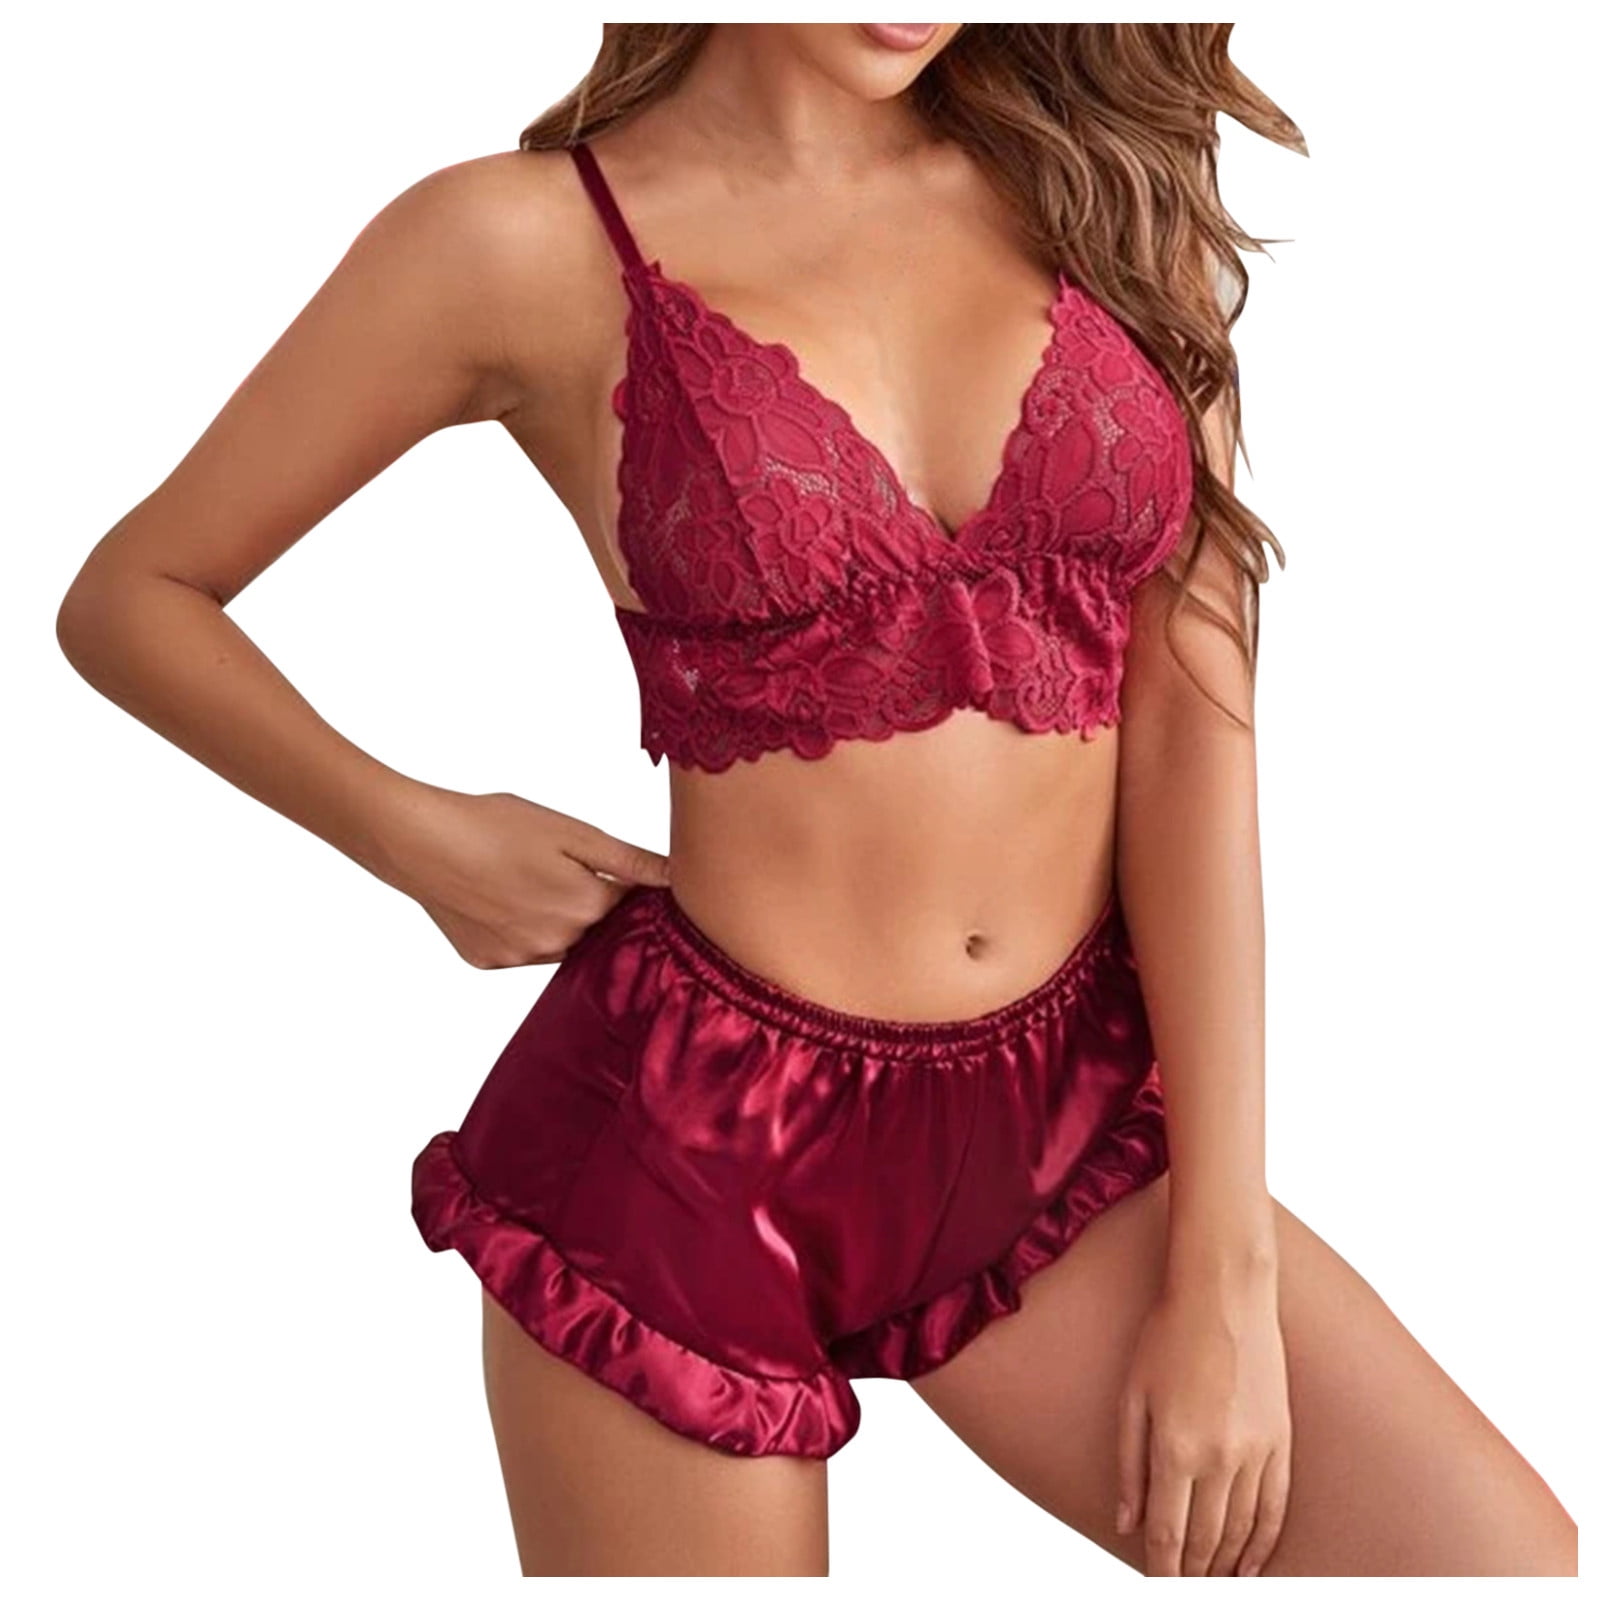 Women Lace Bra and Panty Sets See-Through Erotic Lingerie Set Brassiere -  Walmart.com